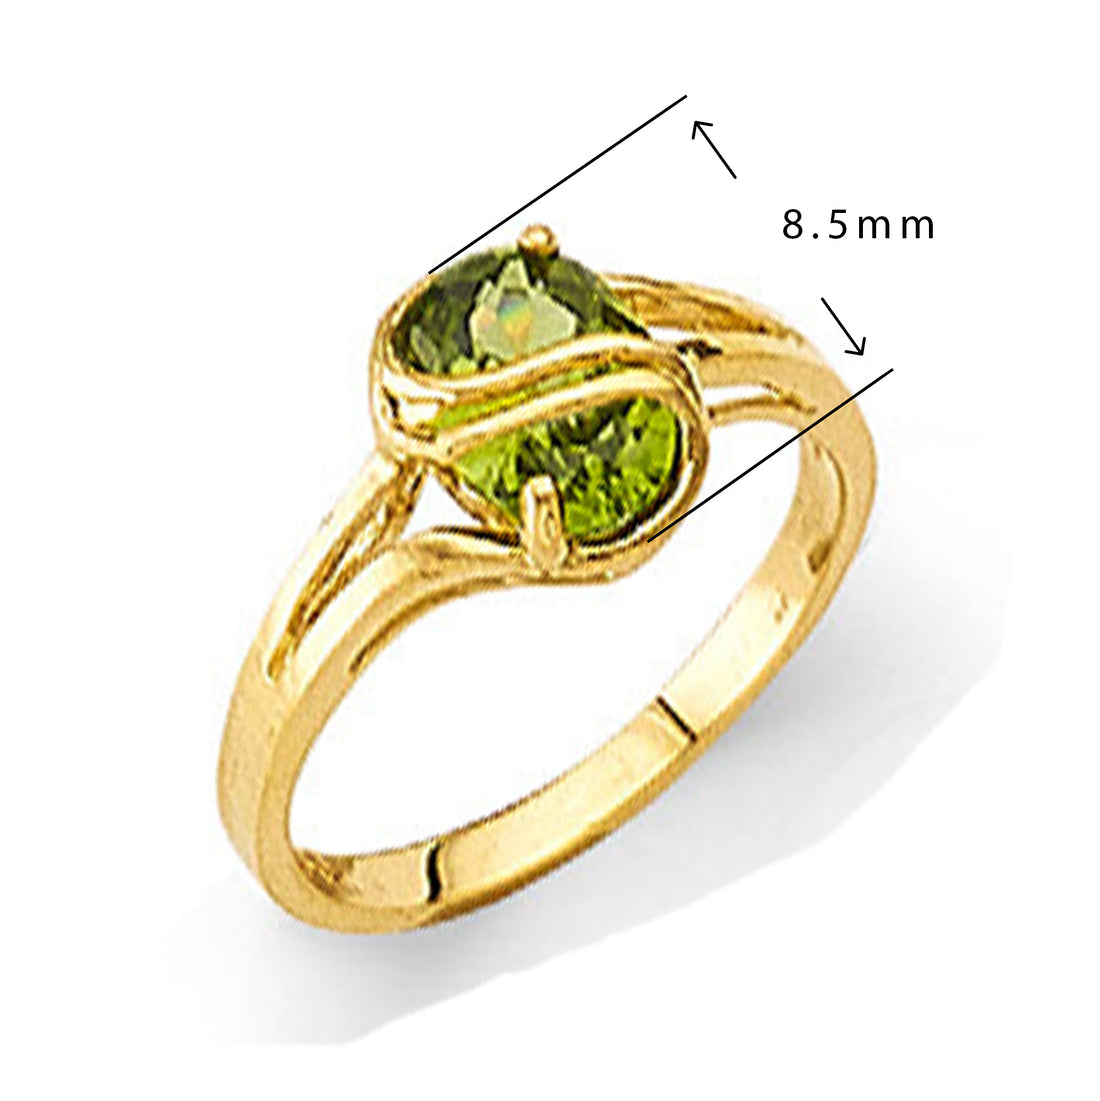 Pristine Peridot Ring in Solid Gold with Measurement